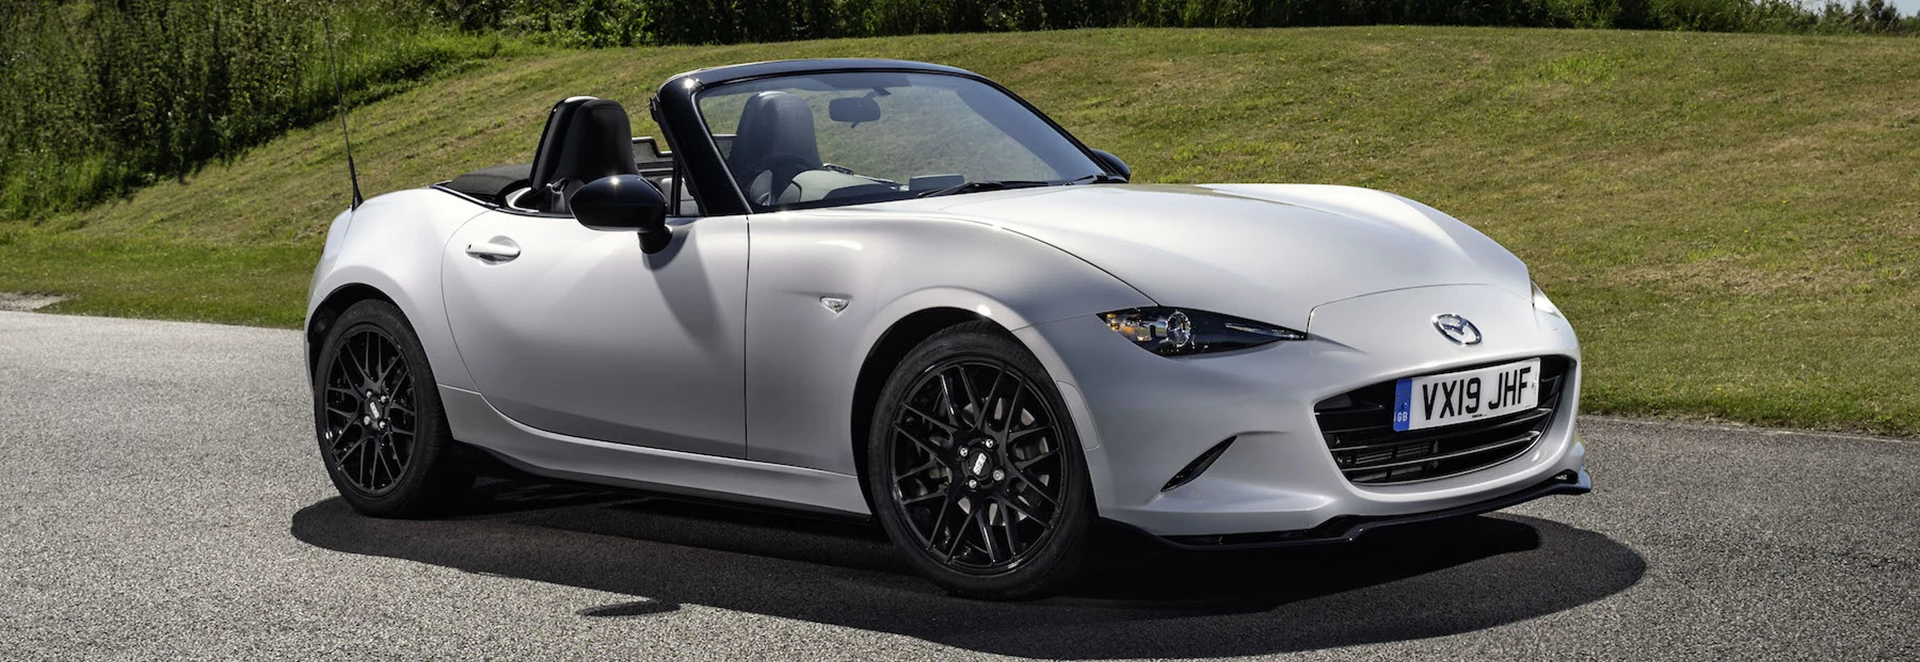 Mazda extends MX-5 personalisation with new dealer-fitted accessory packs